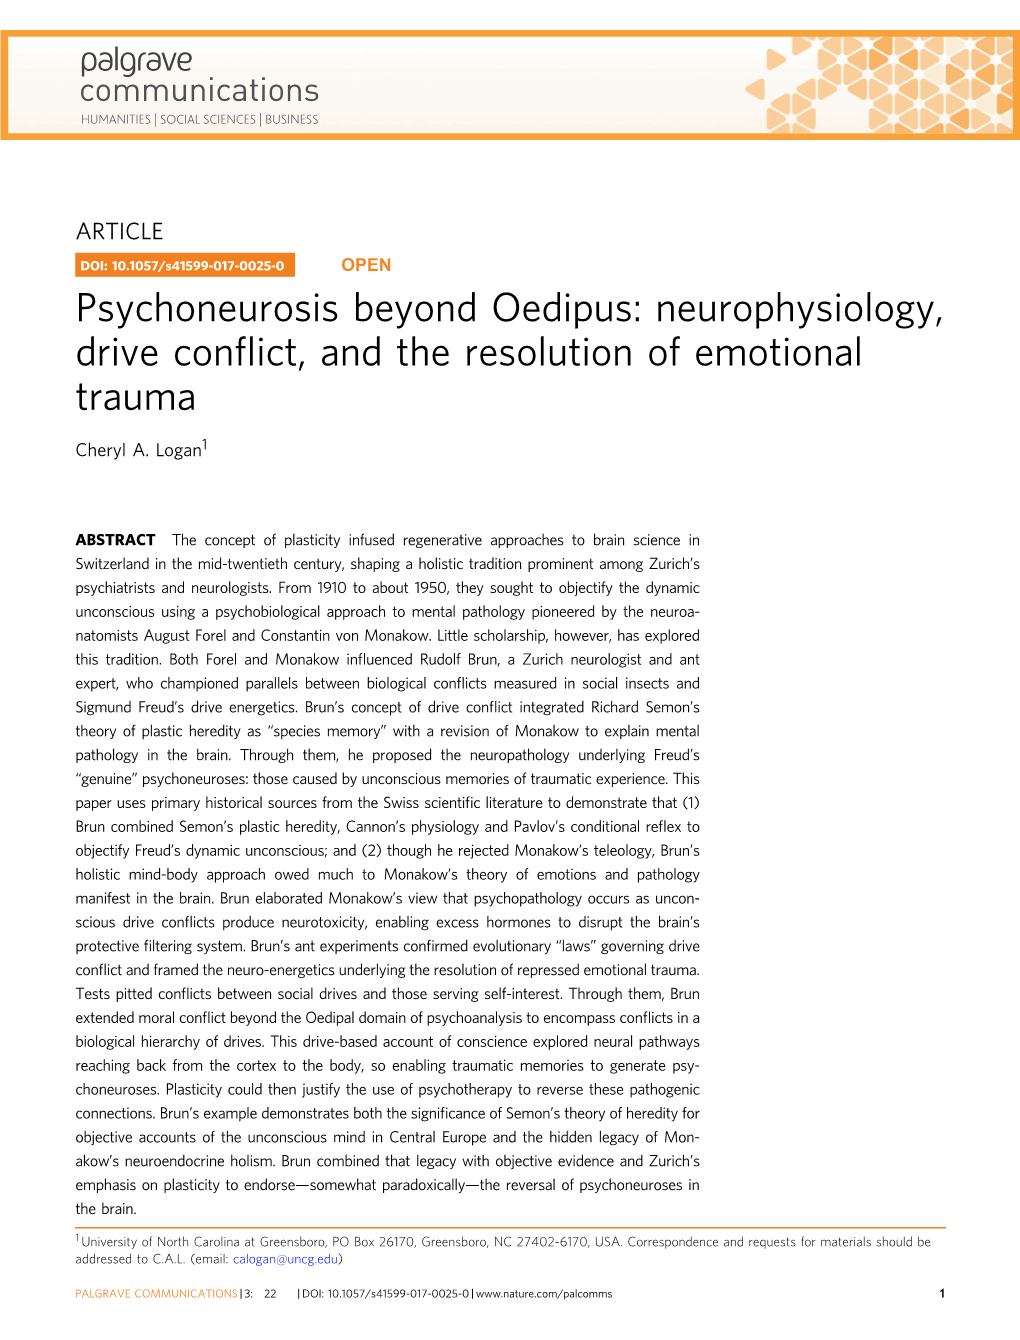 Neurophysiology, Drive Conflict, and the Resolution of Emotional Trauma